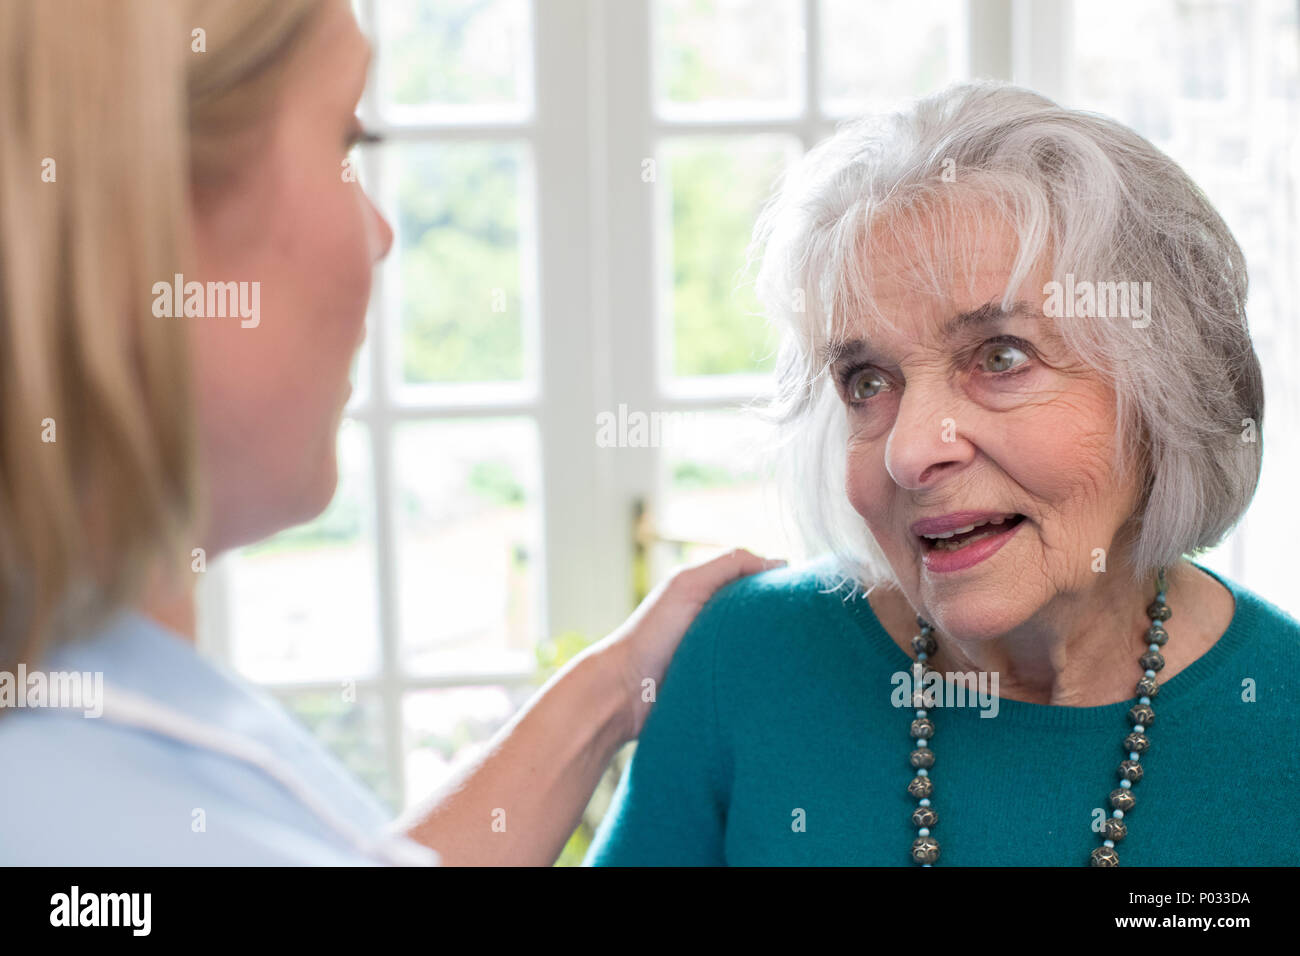 Care Worker Talking To Senior Woman At Home Stock Photo